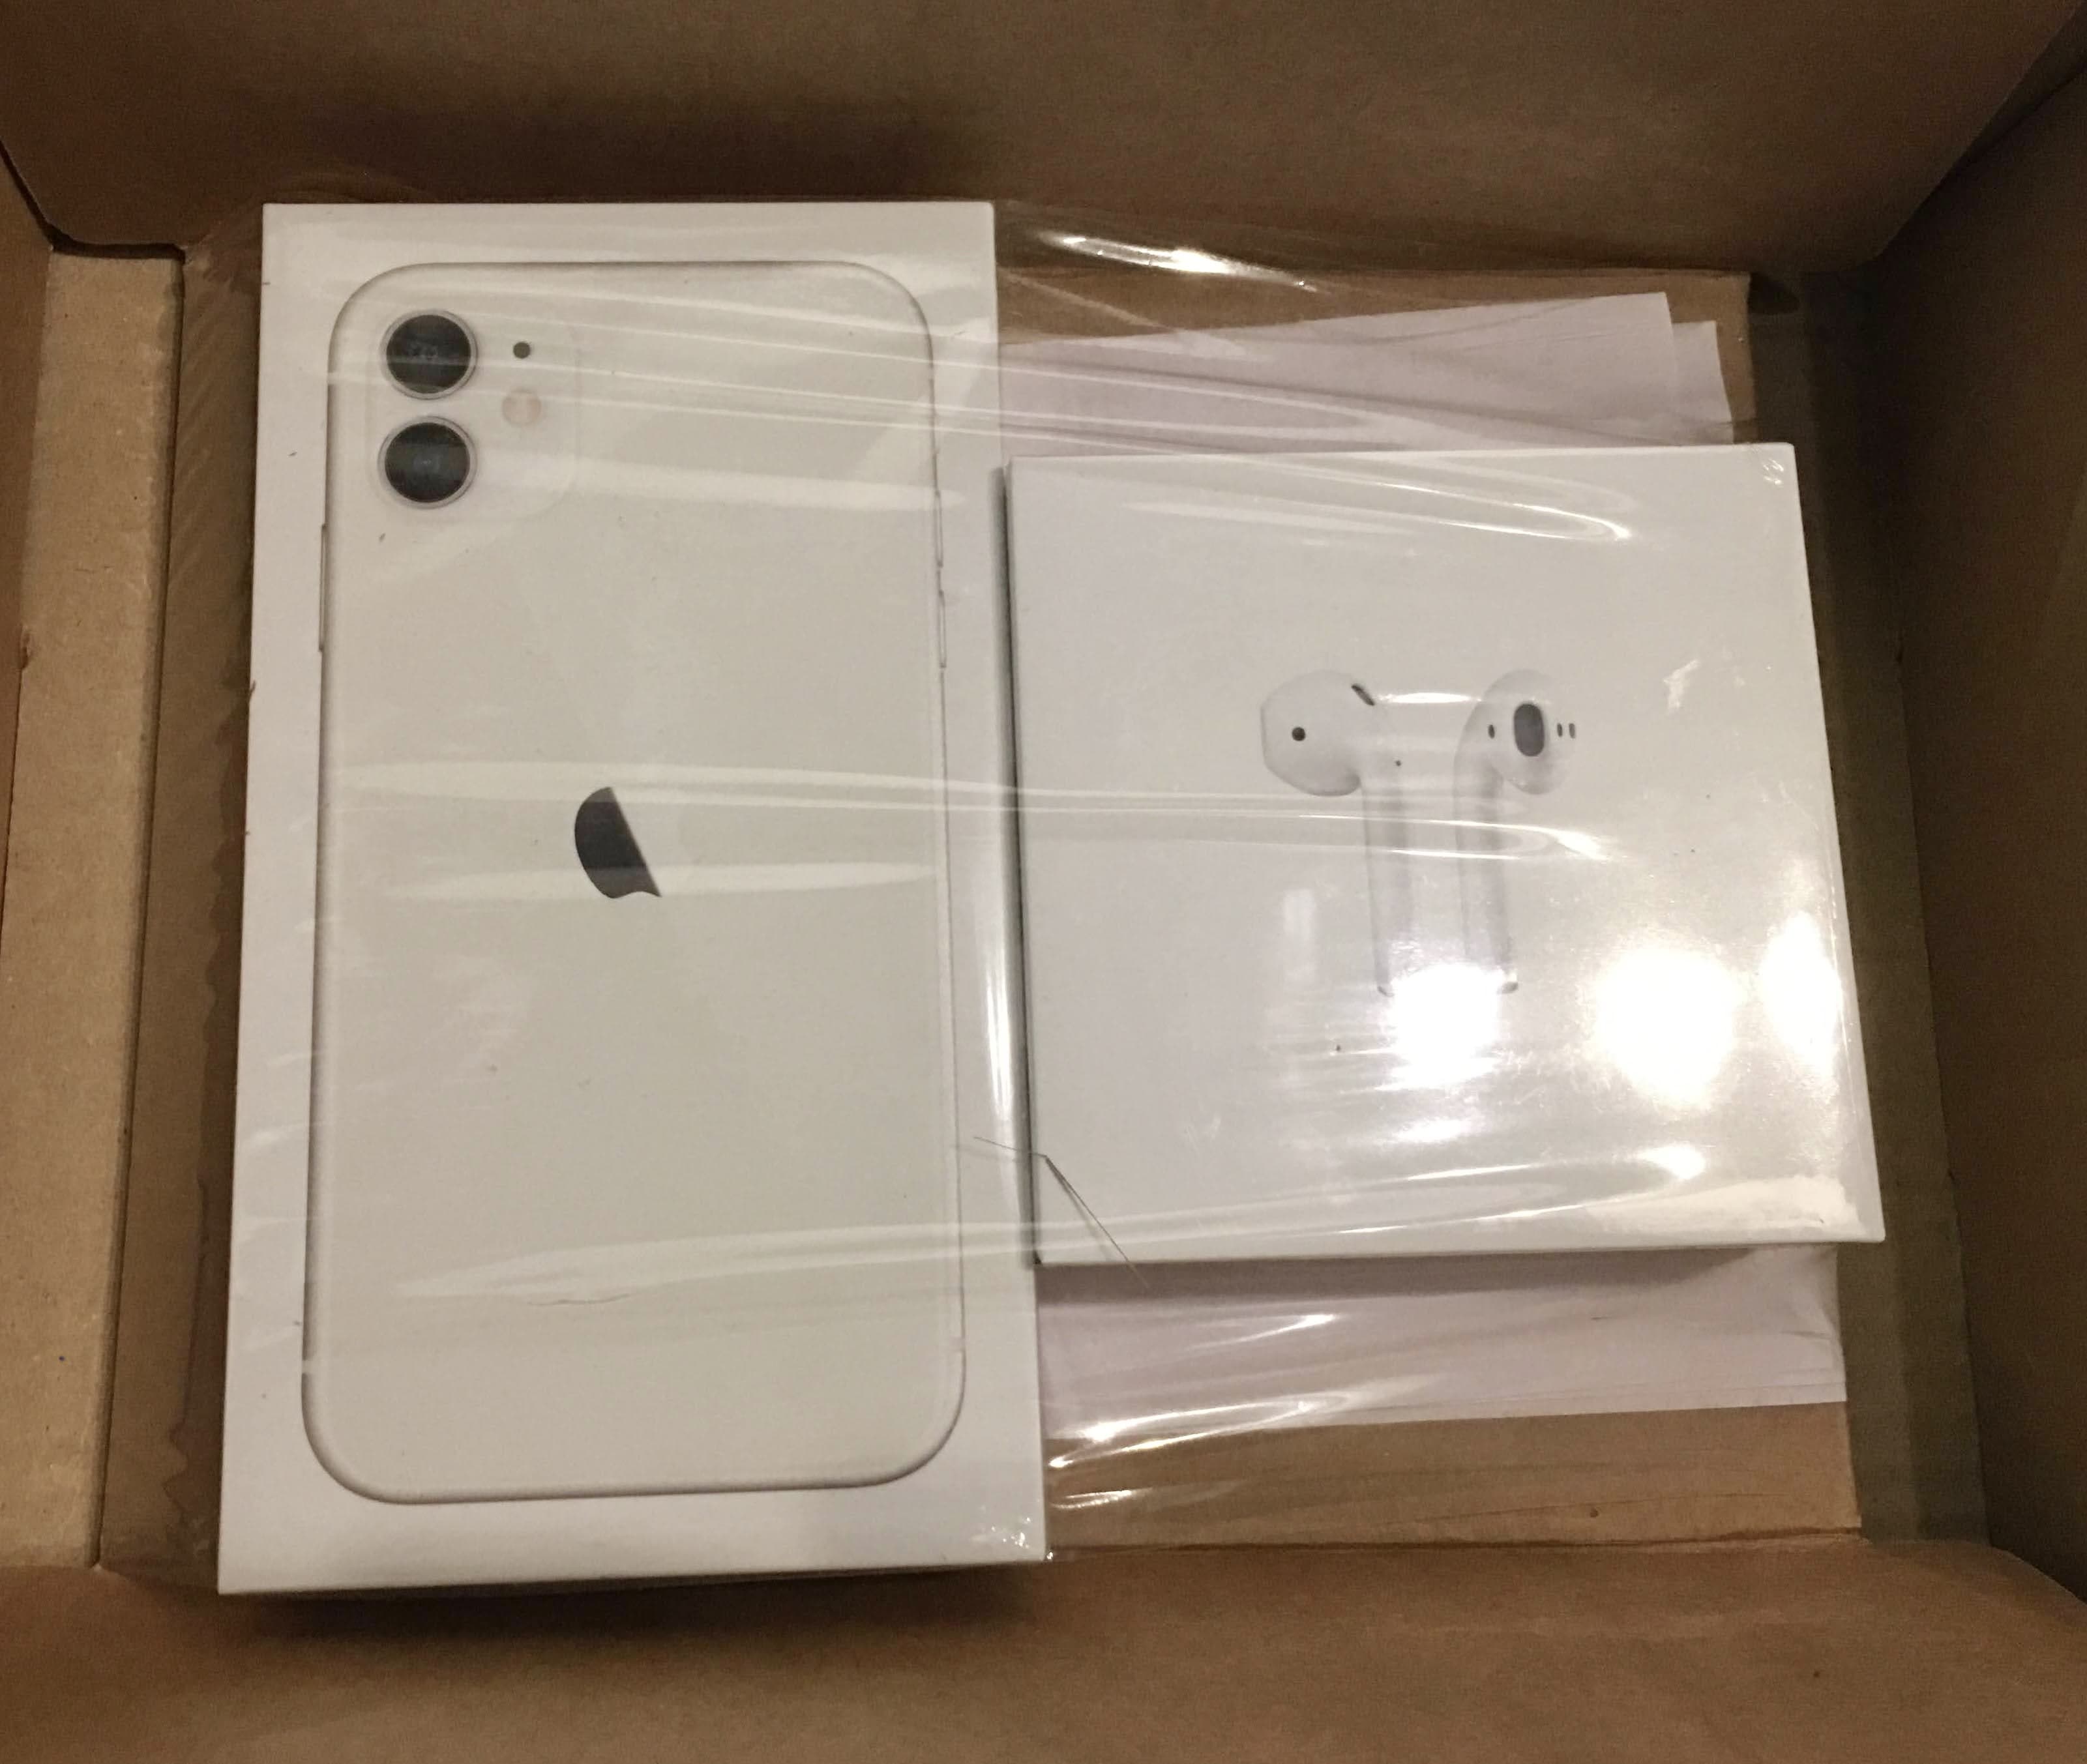 iPhone and AirPods packed in original box